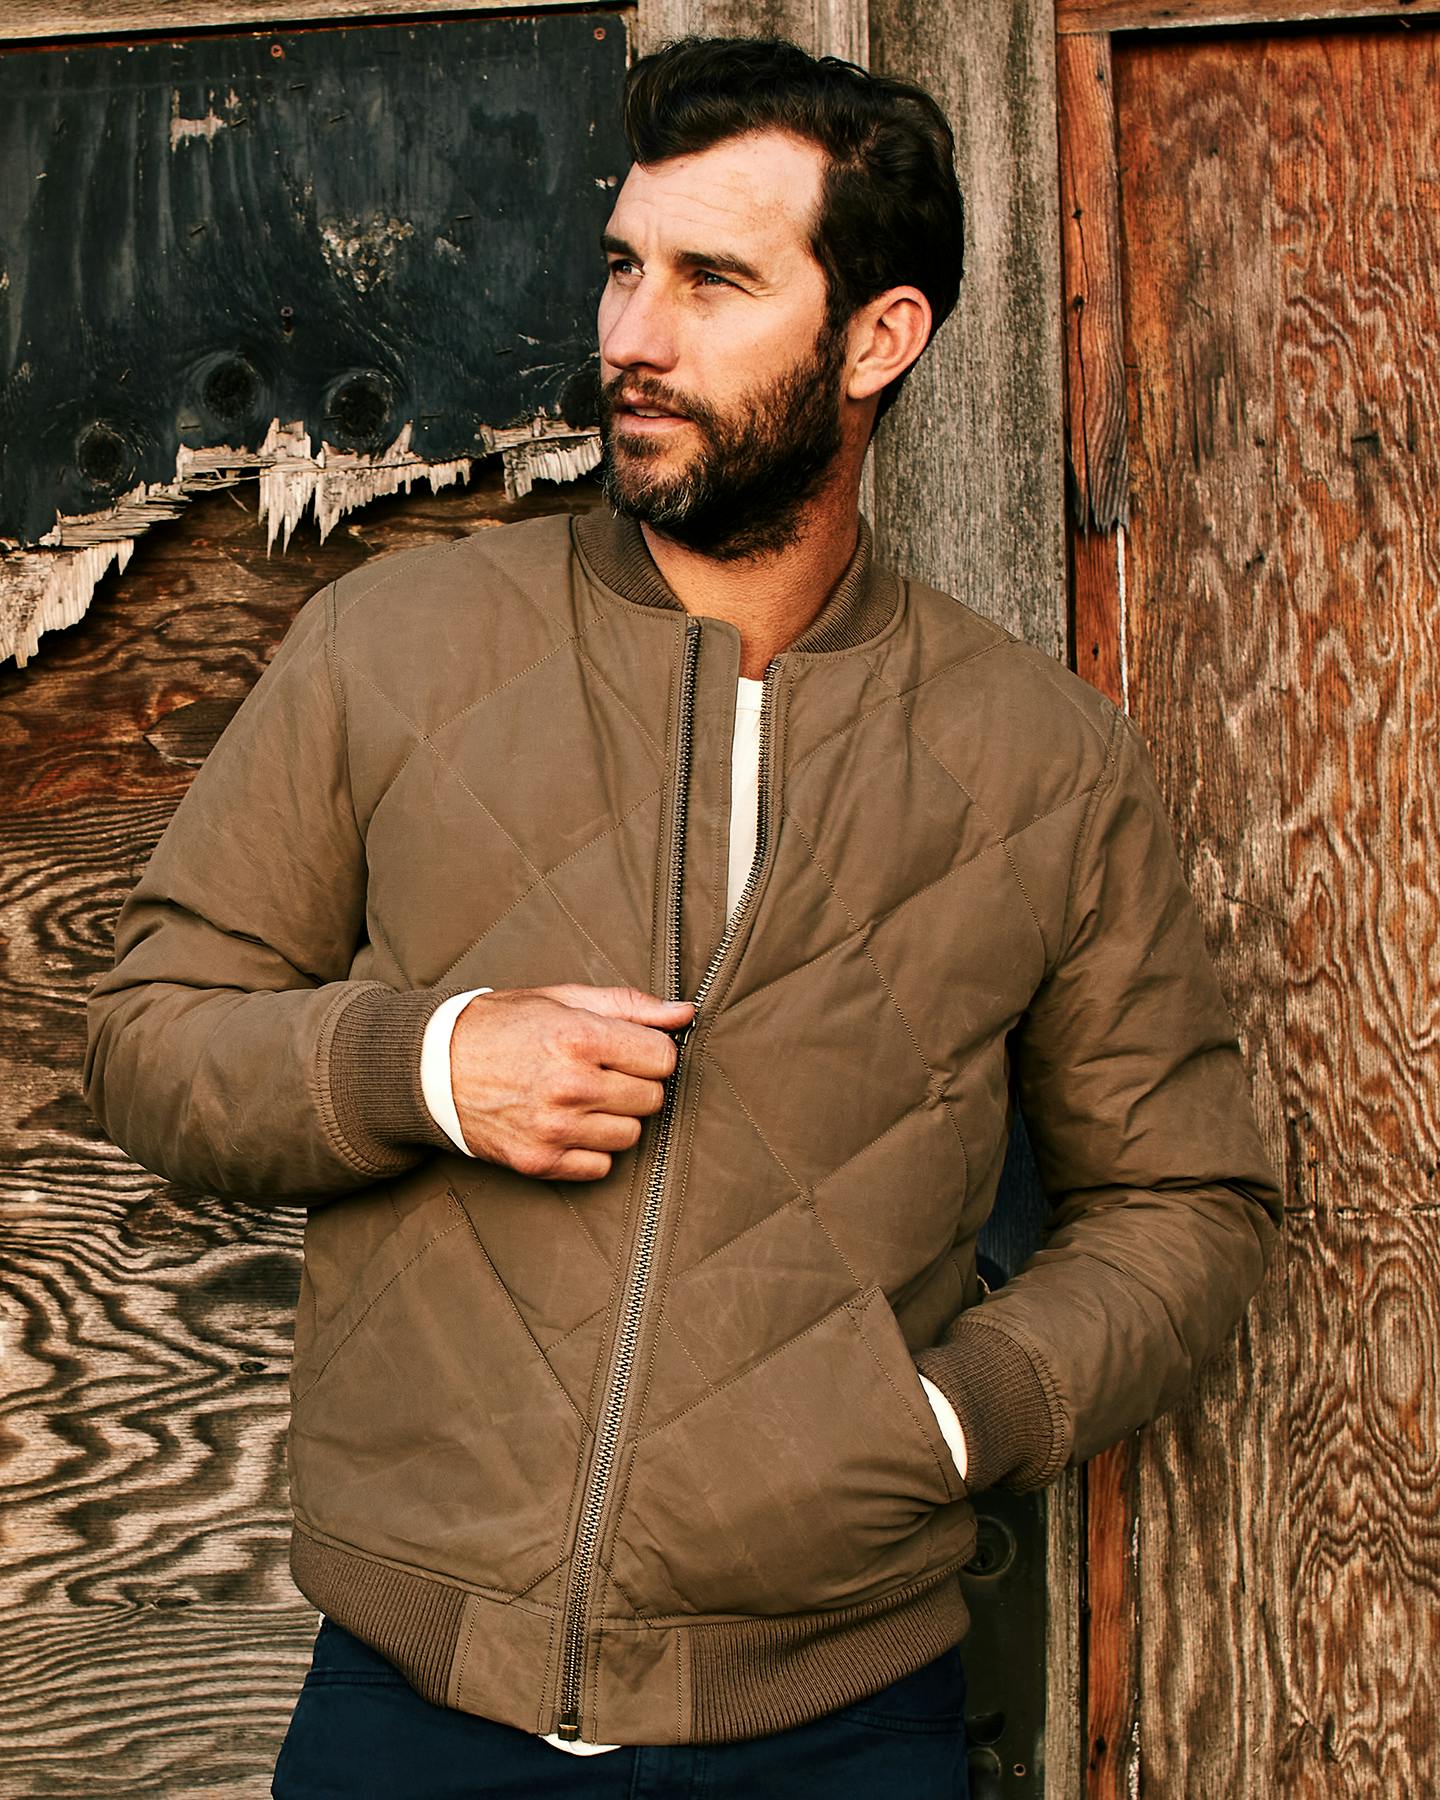 Man wearing jacket leaning against brick wall